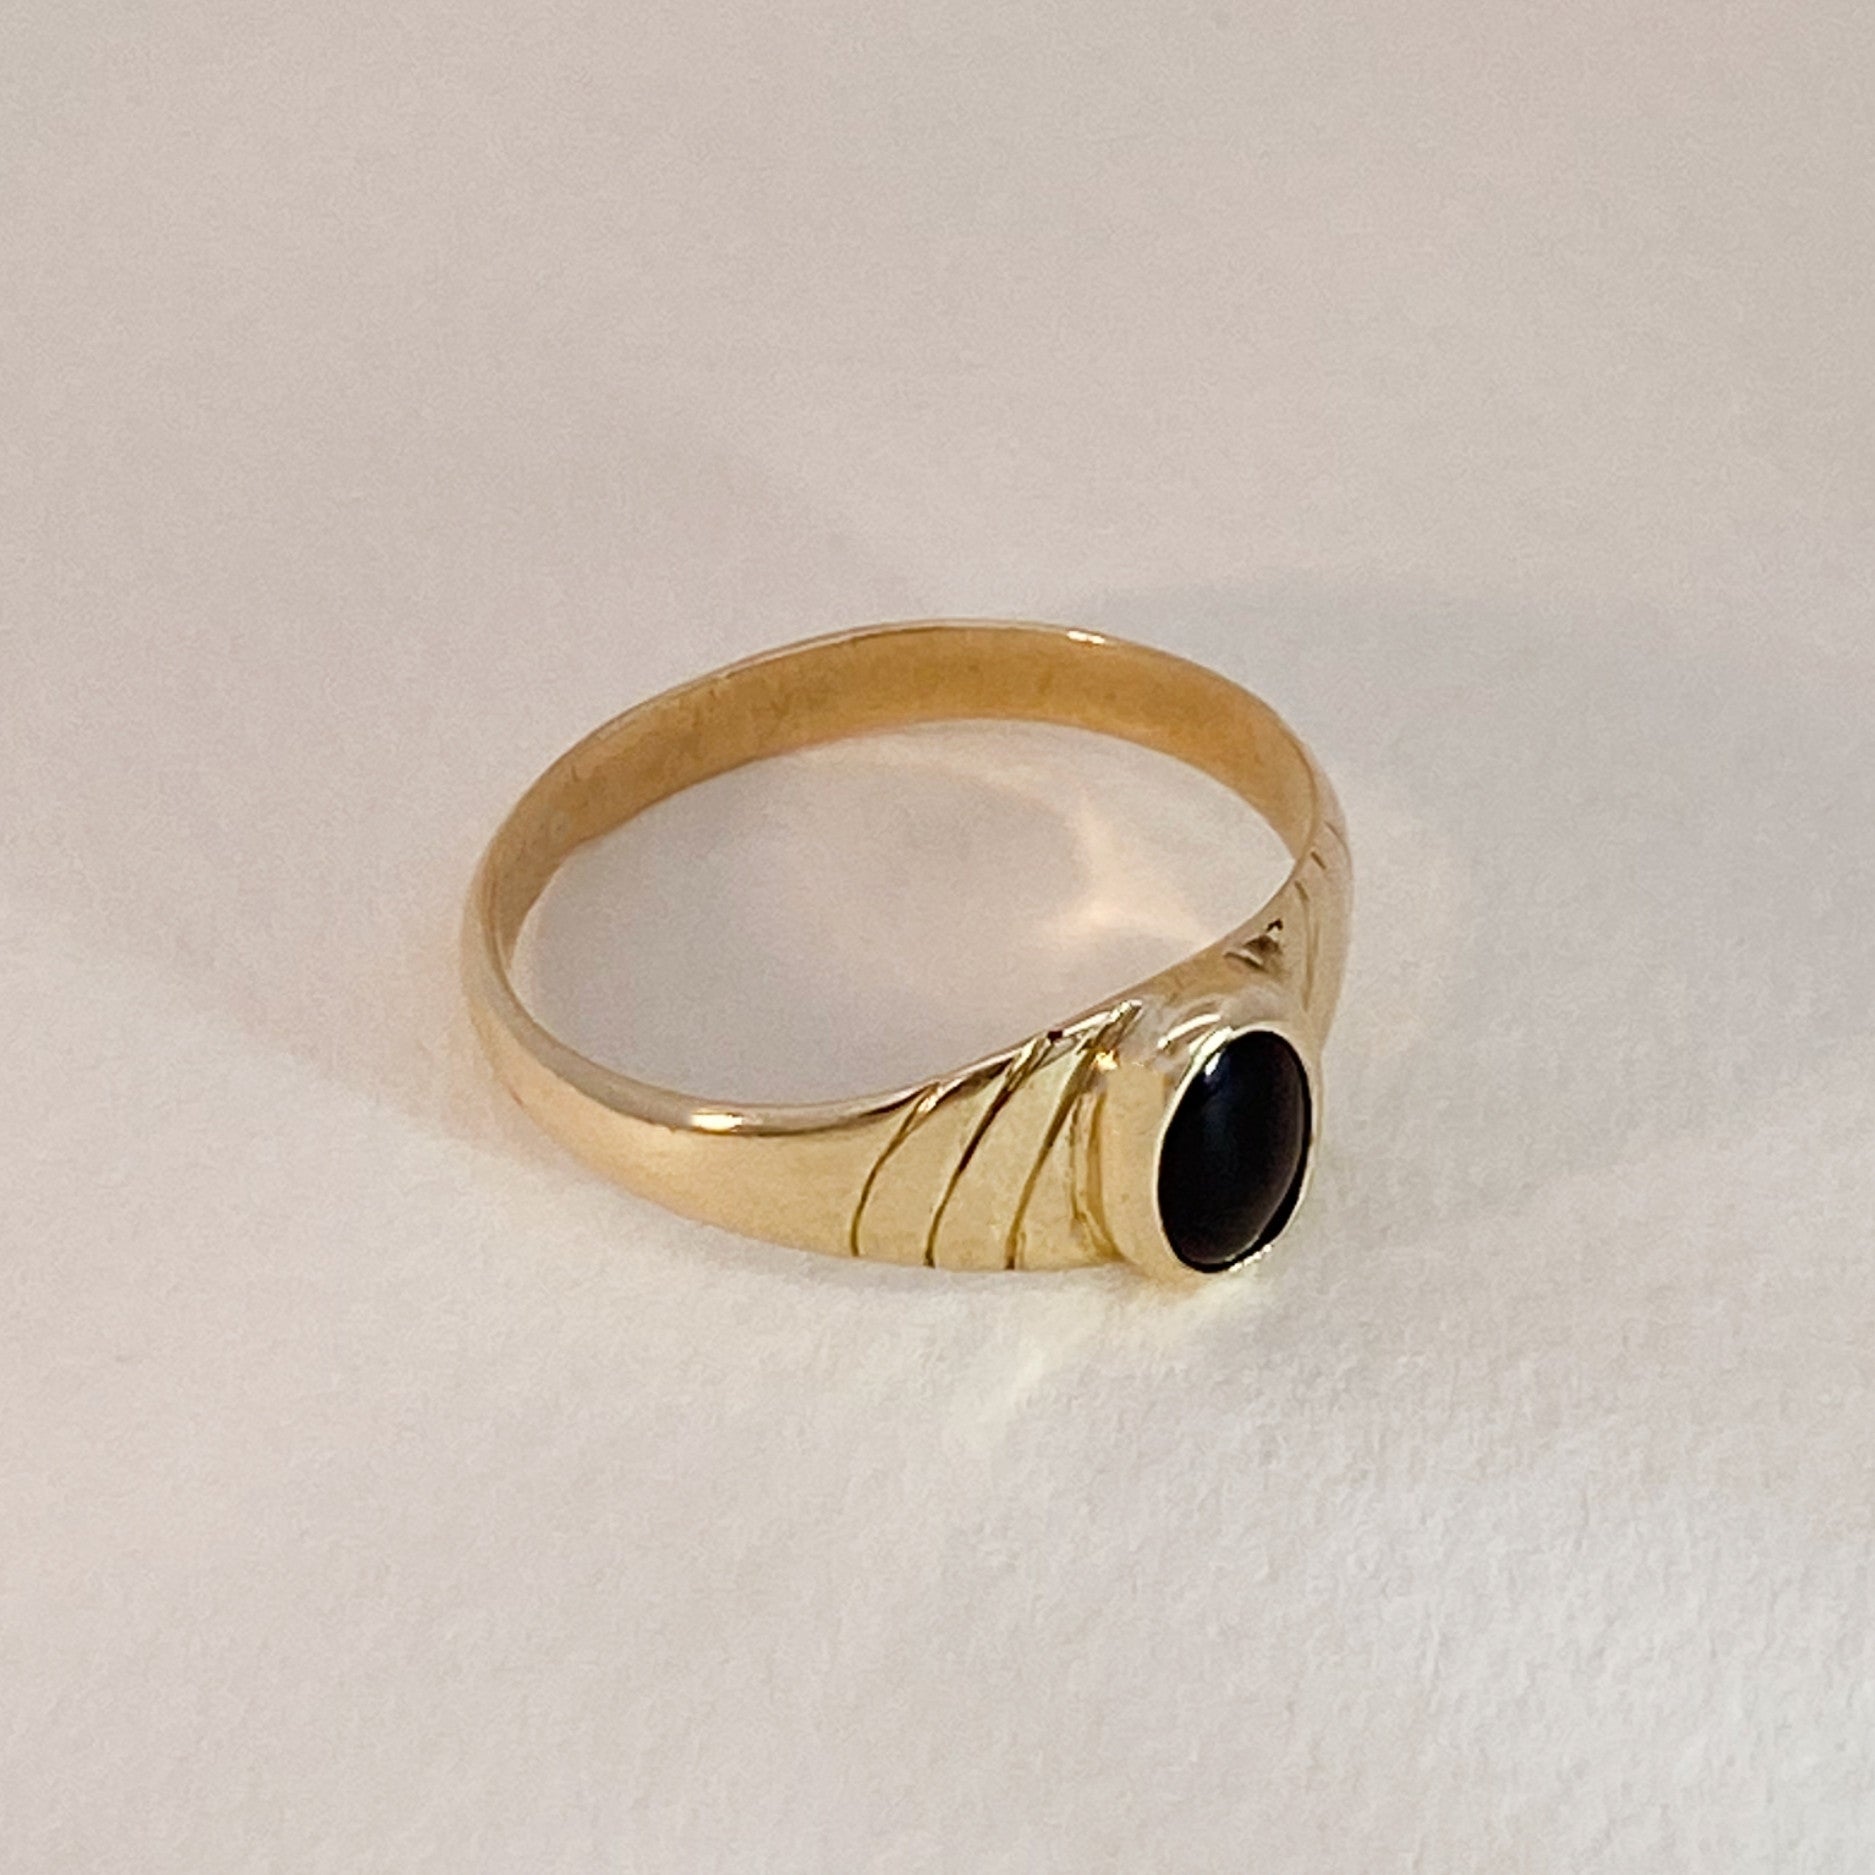 Vintage oval onyx ring